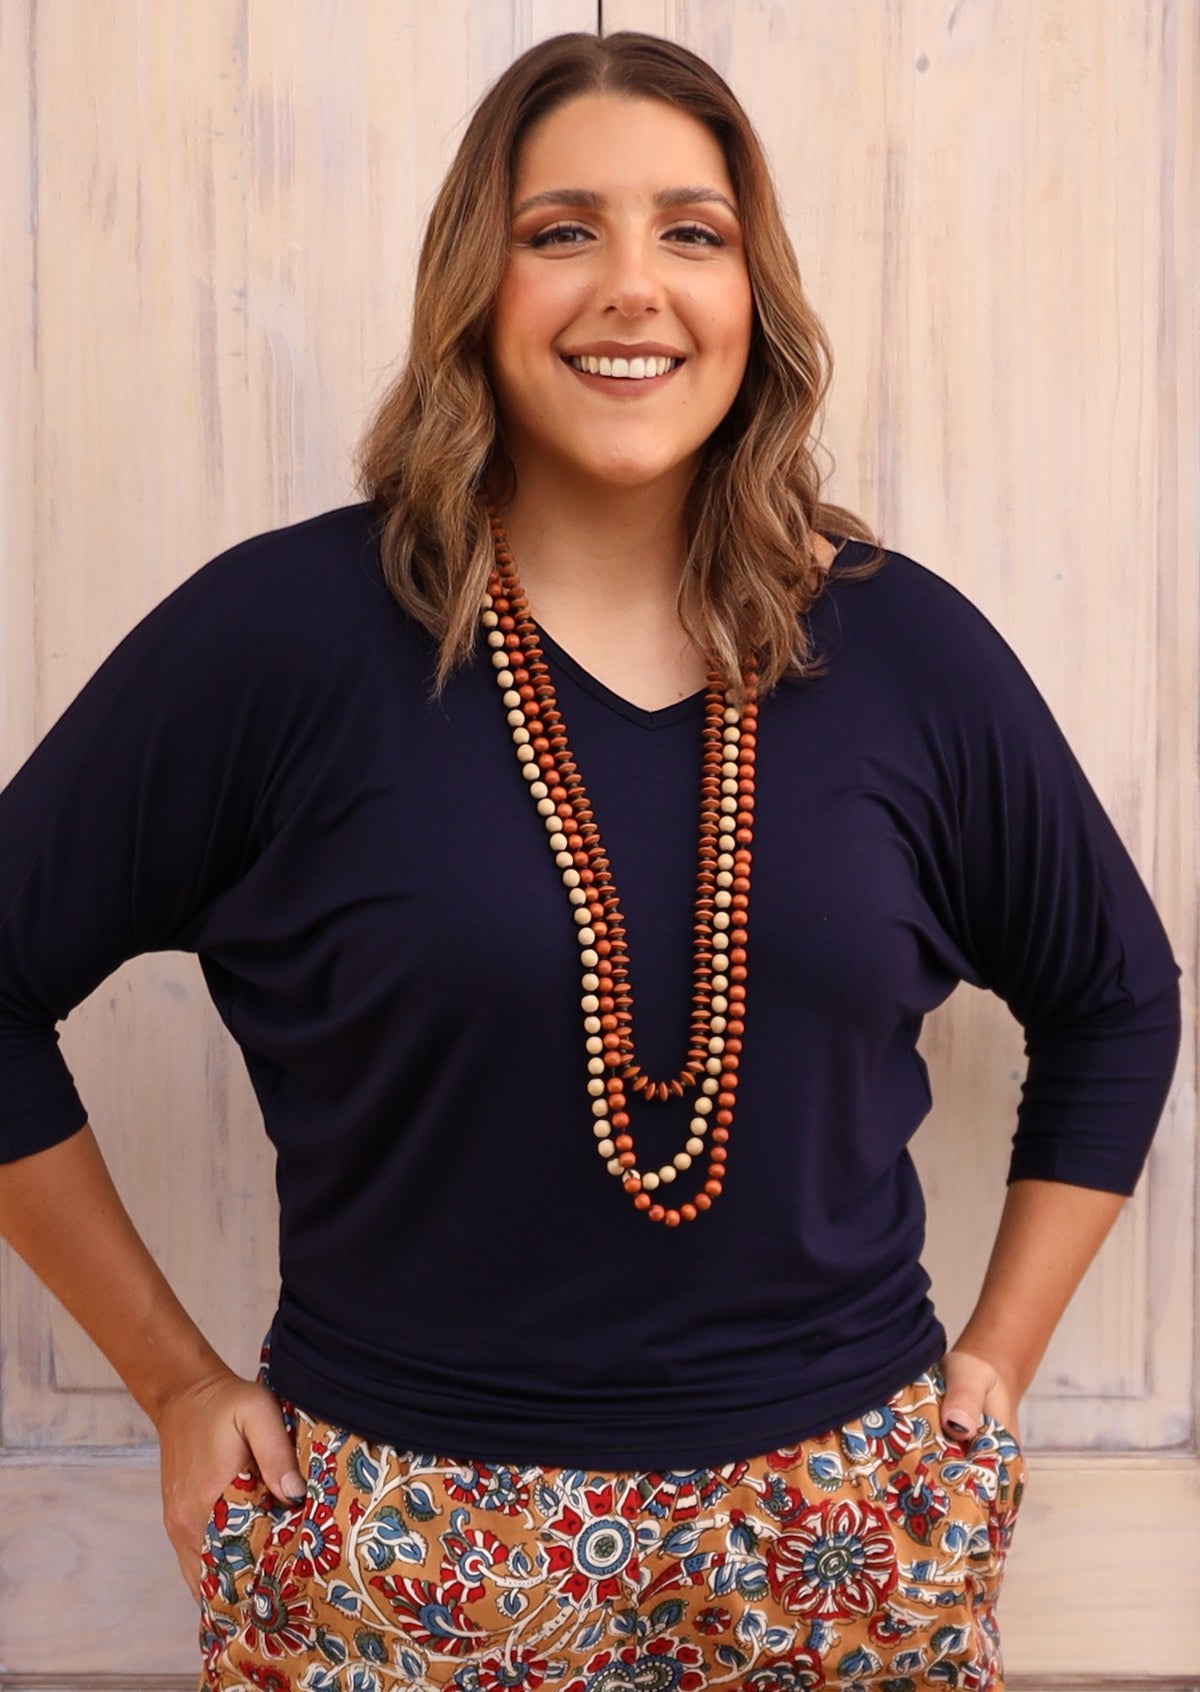 Woman wearing a 3/4 sleeve rayon batwing v-neck navy blue top with wooden beads.